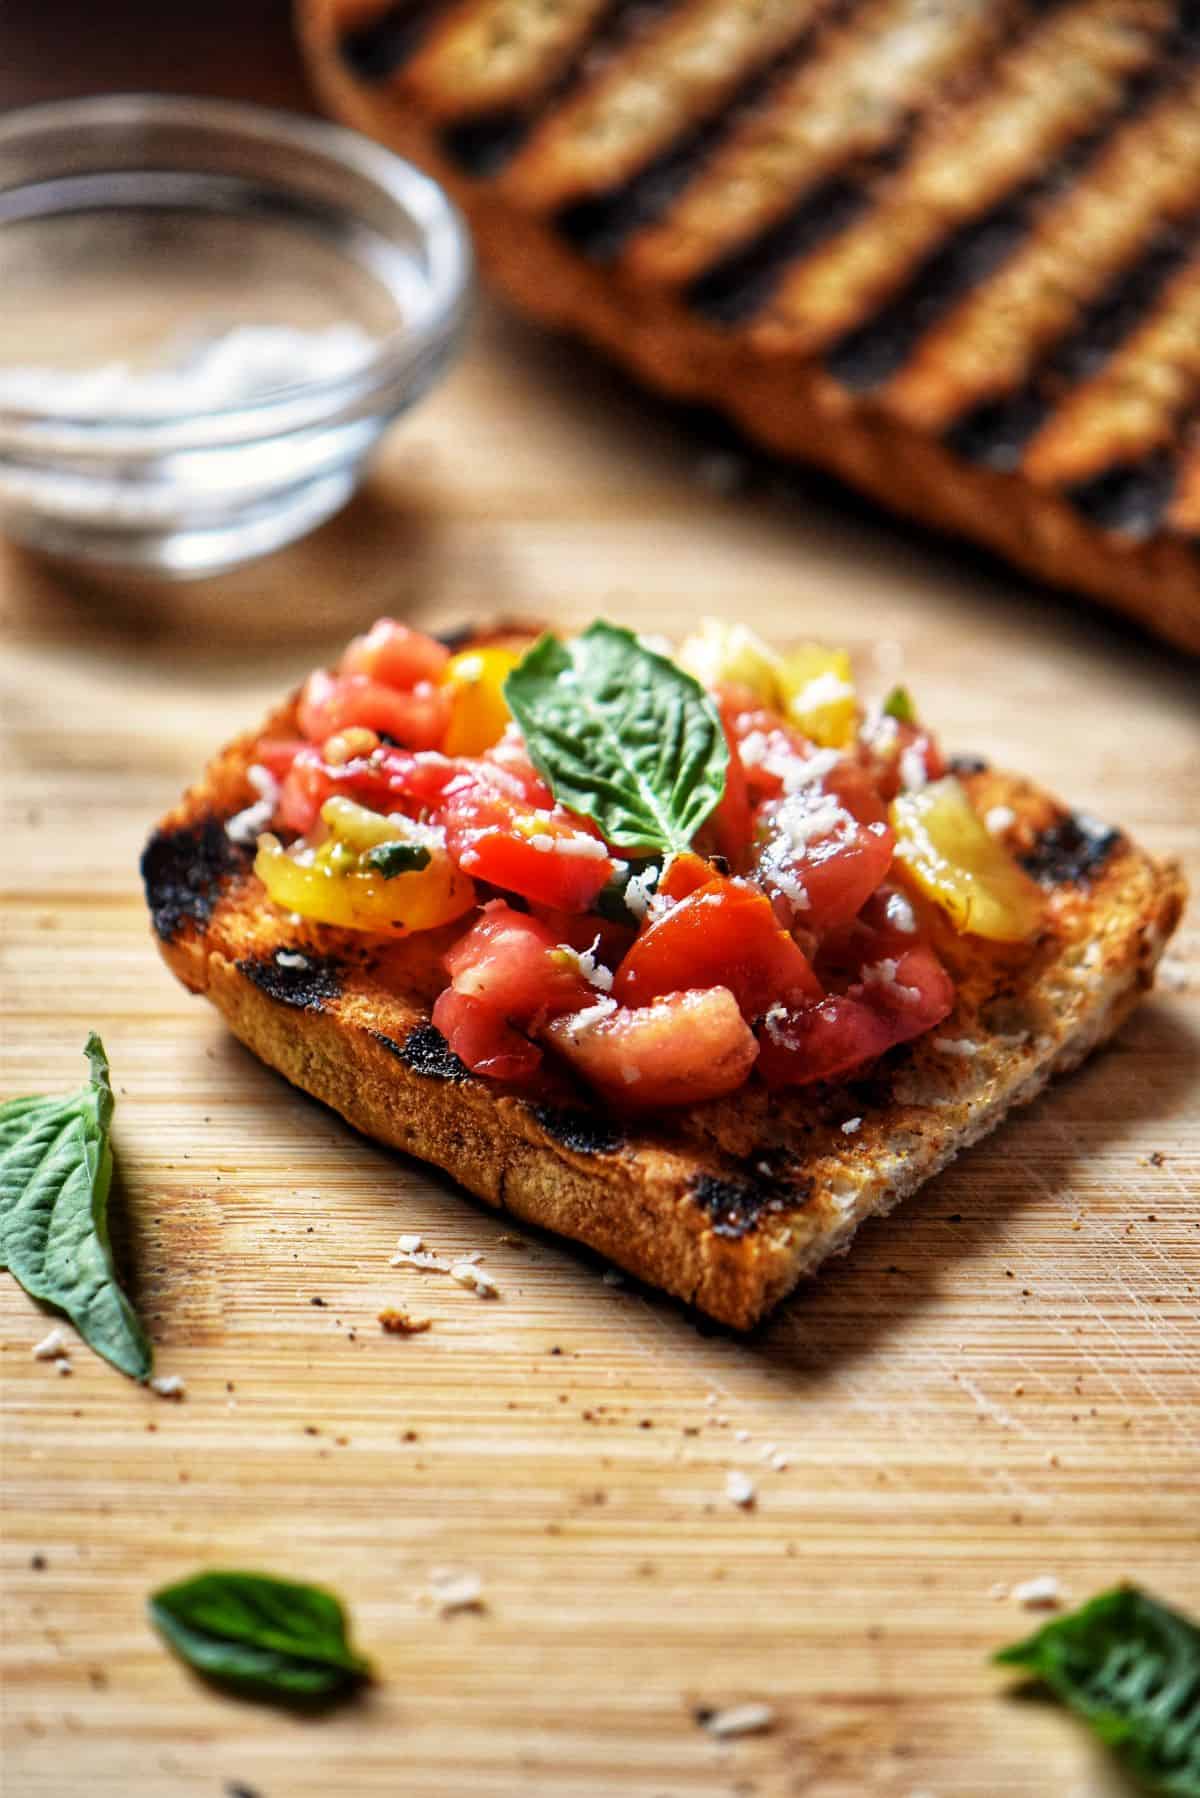 Charred Italian Crusty bread topped with a tomato basil mixture makes the best bruschetta.